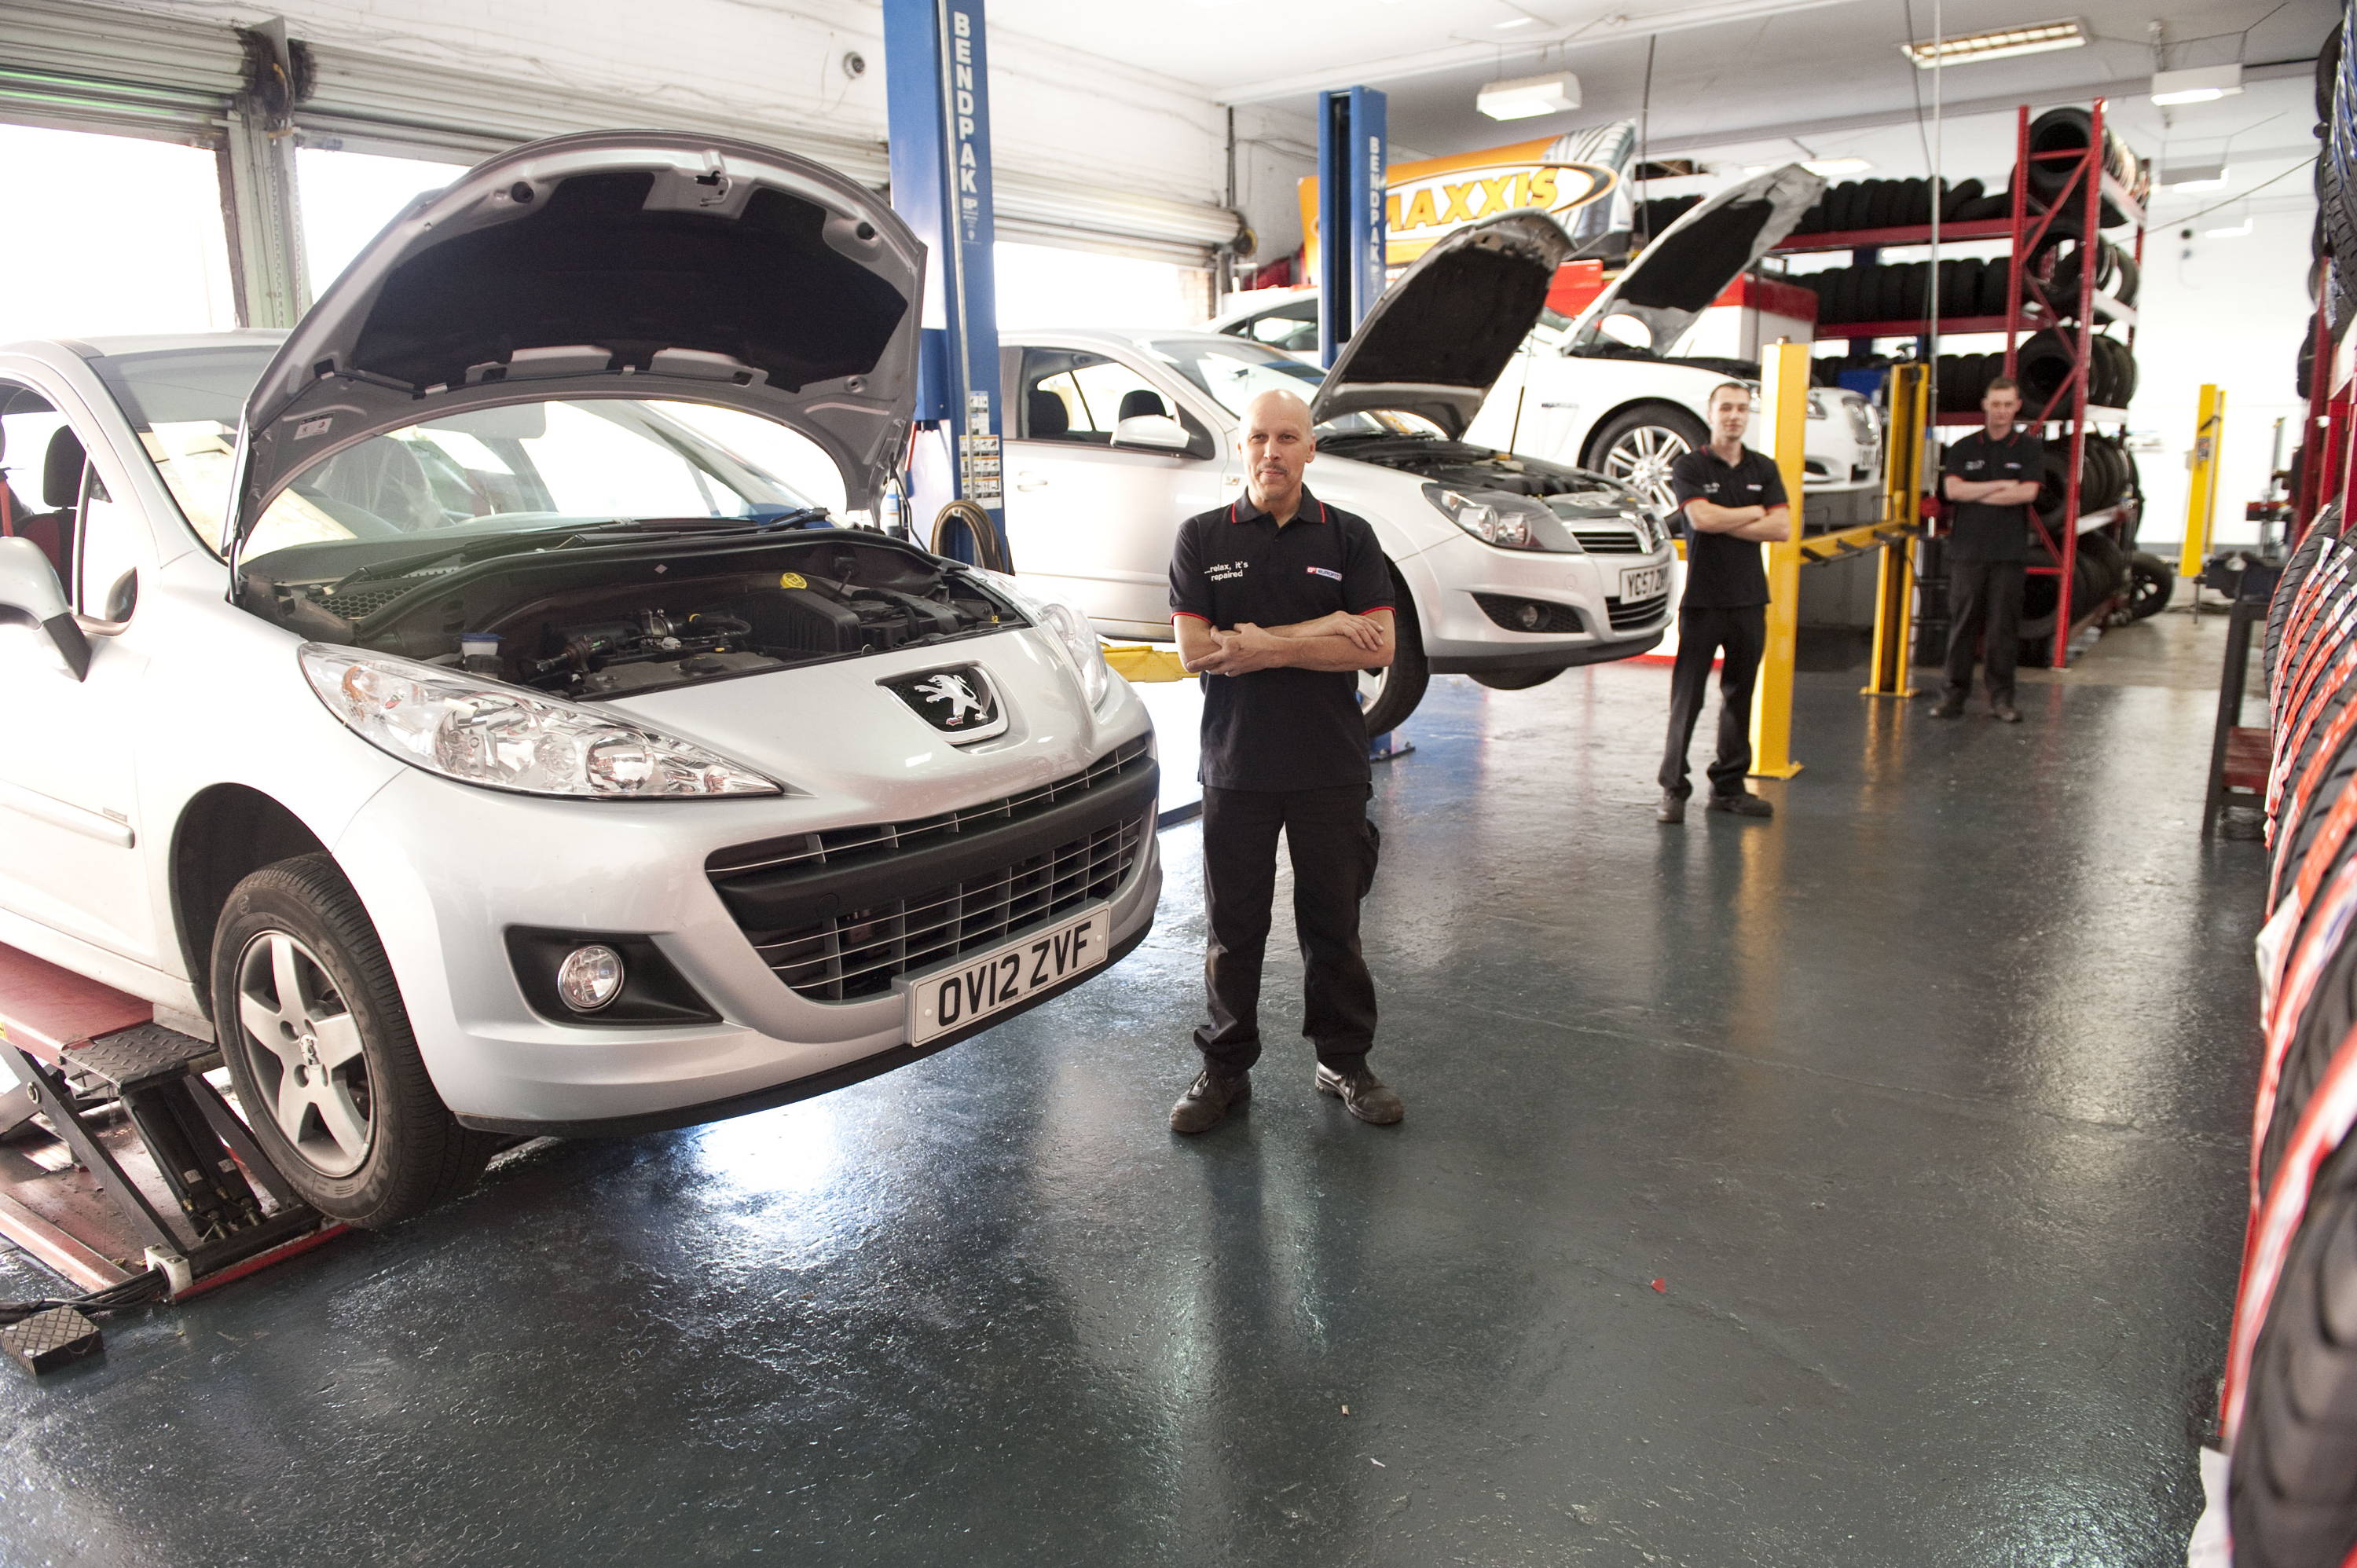 Car bonnet open of cars in garage, with mechanics stood next to them at Bloxwich Eurofit car garage